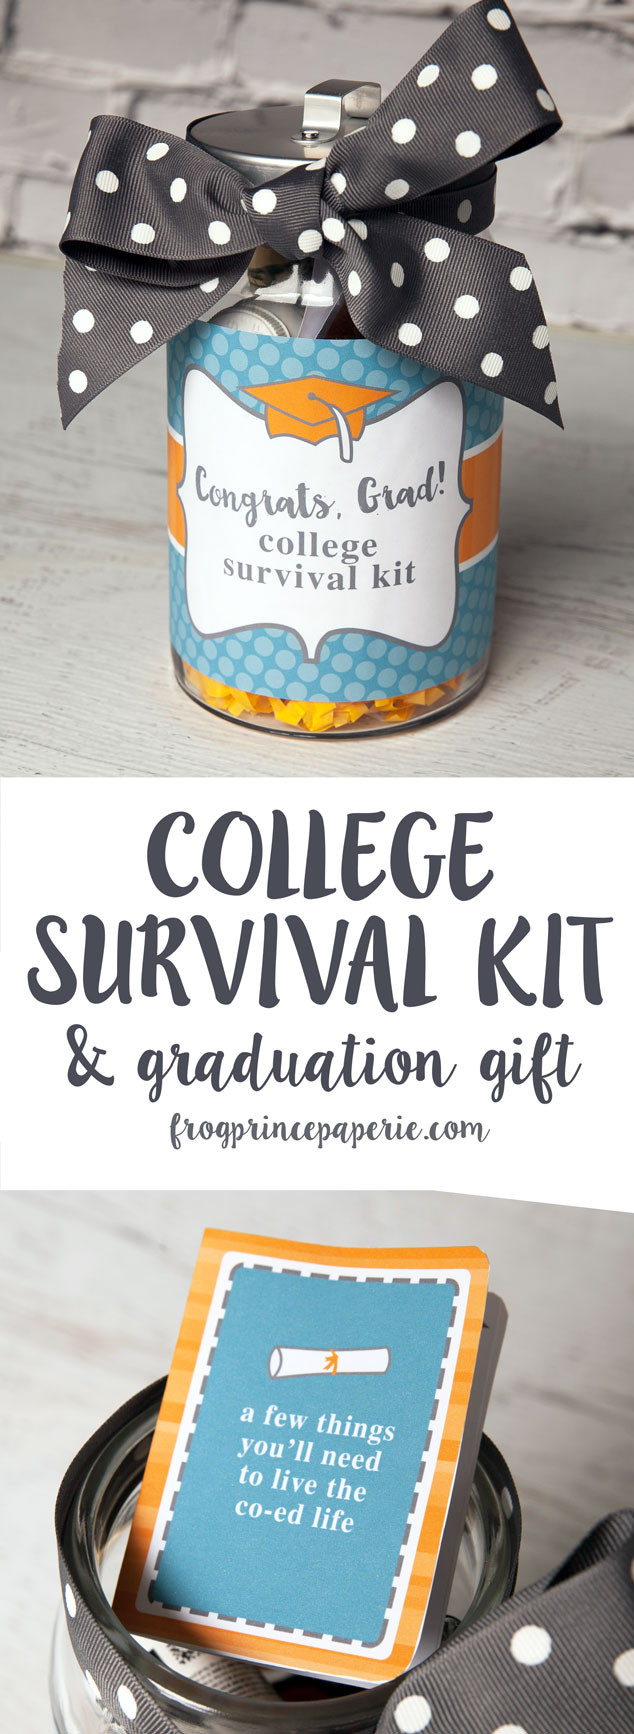 Ideas For College Graduation Gift
 College Survival Kit DIY Graduation Gift Frog Prince Paperie